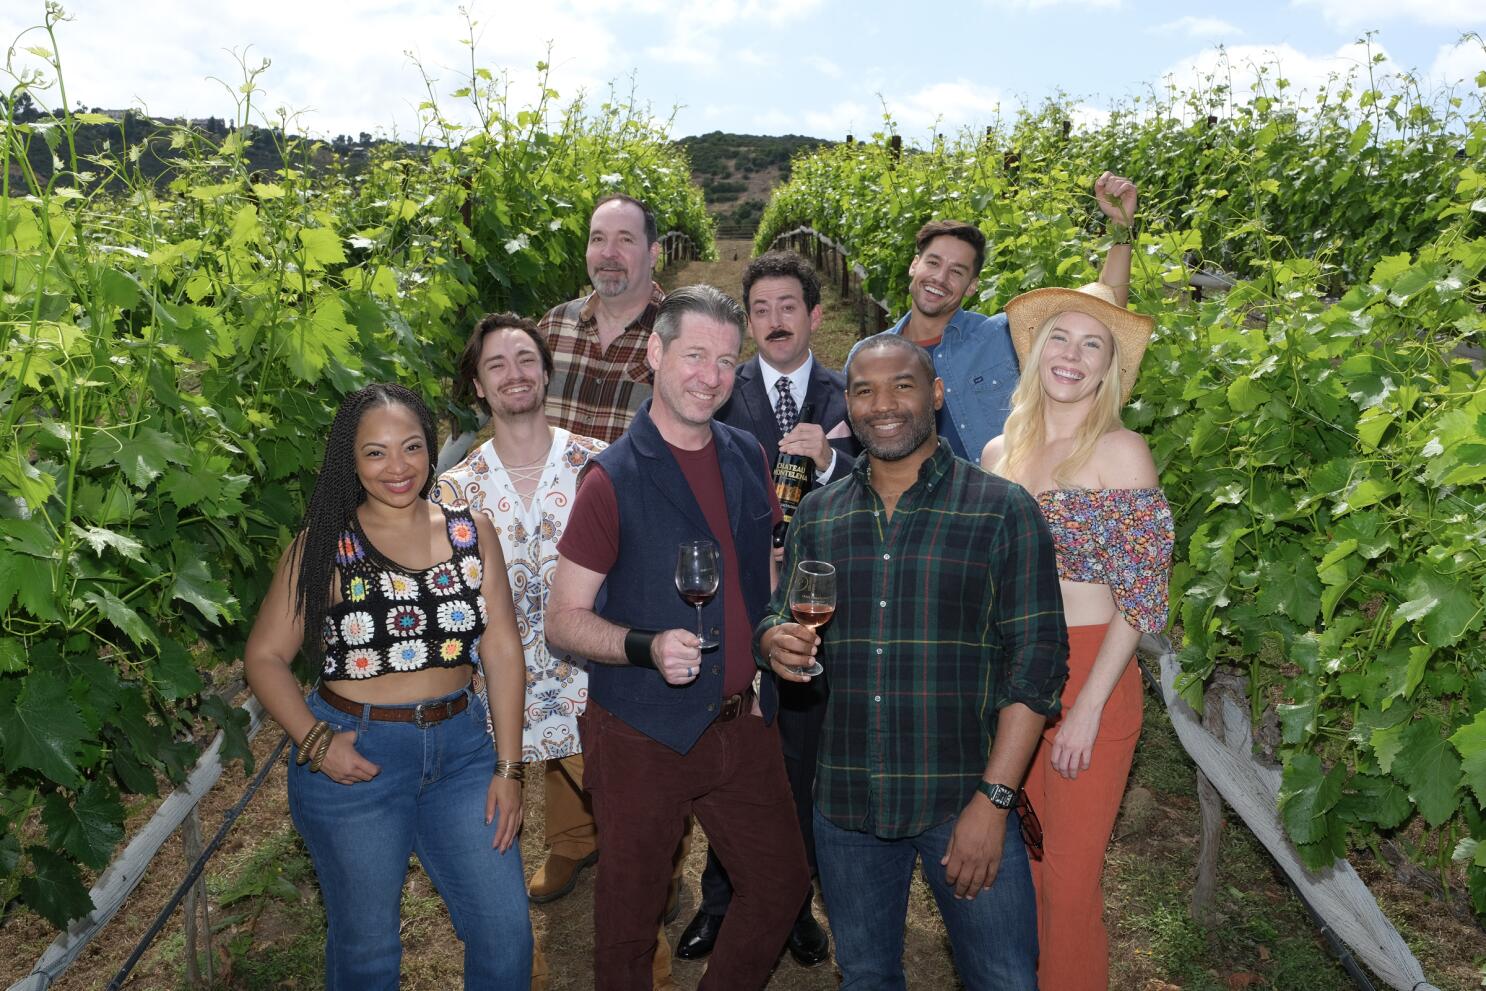 CCAE Theatricals opening world premiere musical based on the wine